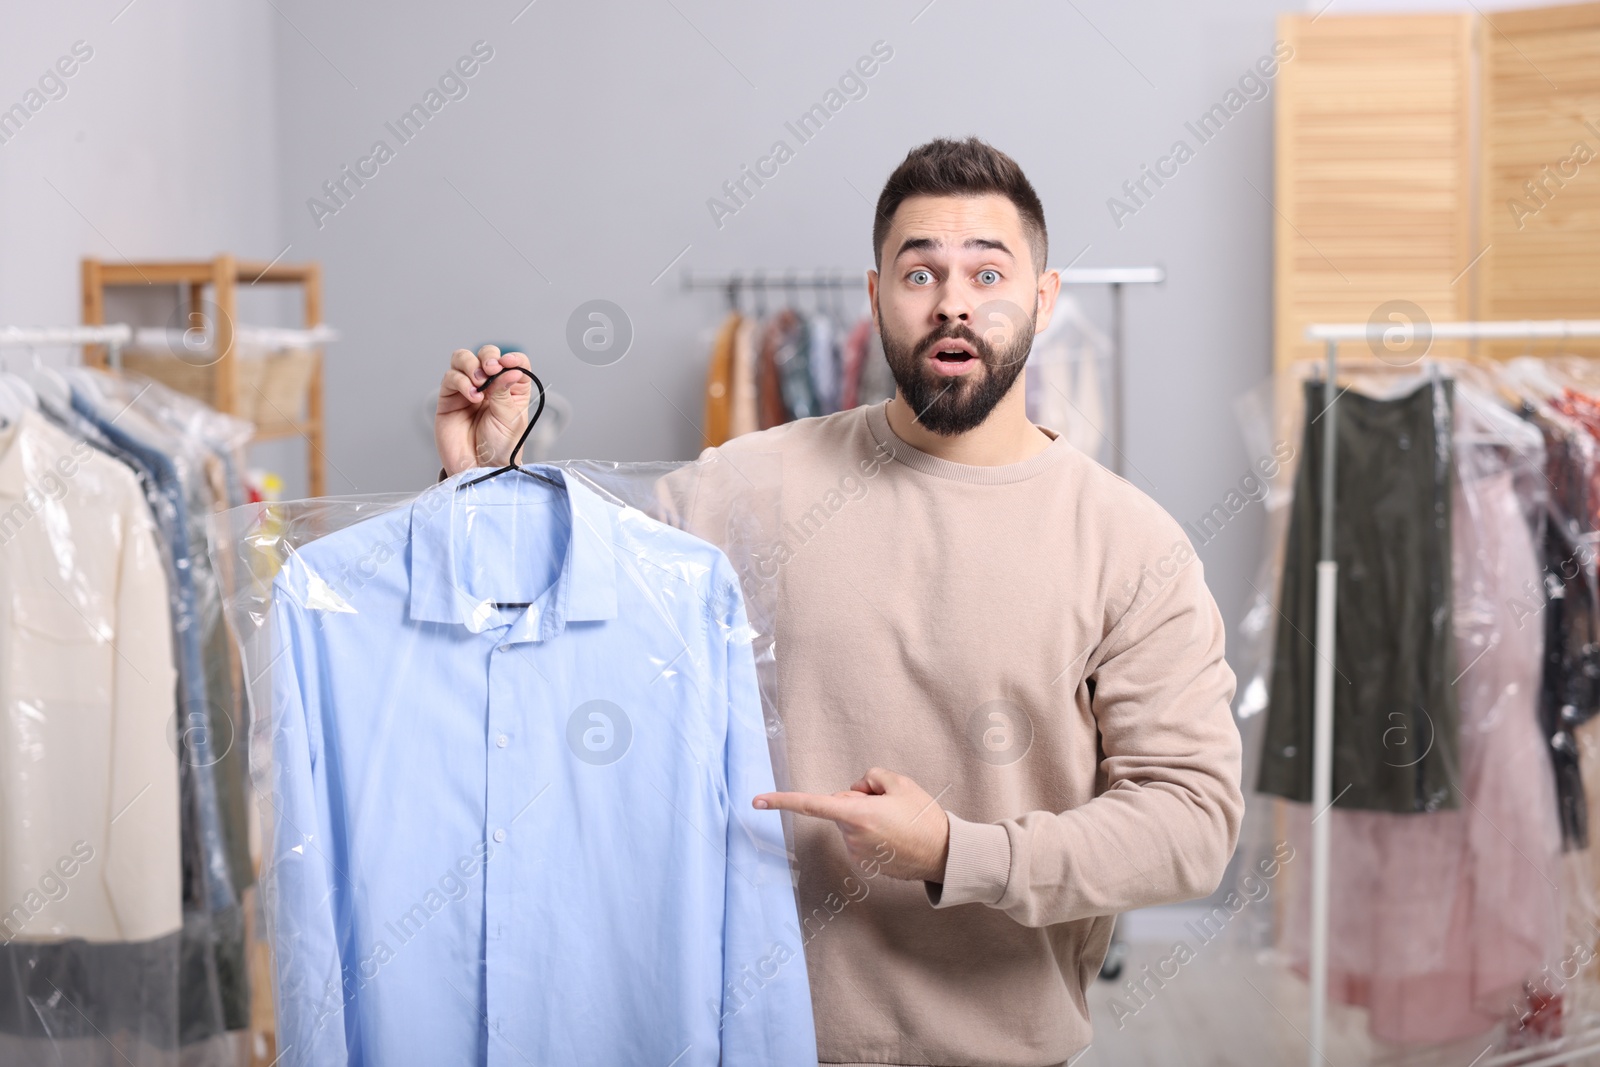 Photo of Dry-cleaning service. Shocked man holding hanger with shirt in plastic bag indoors